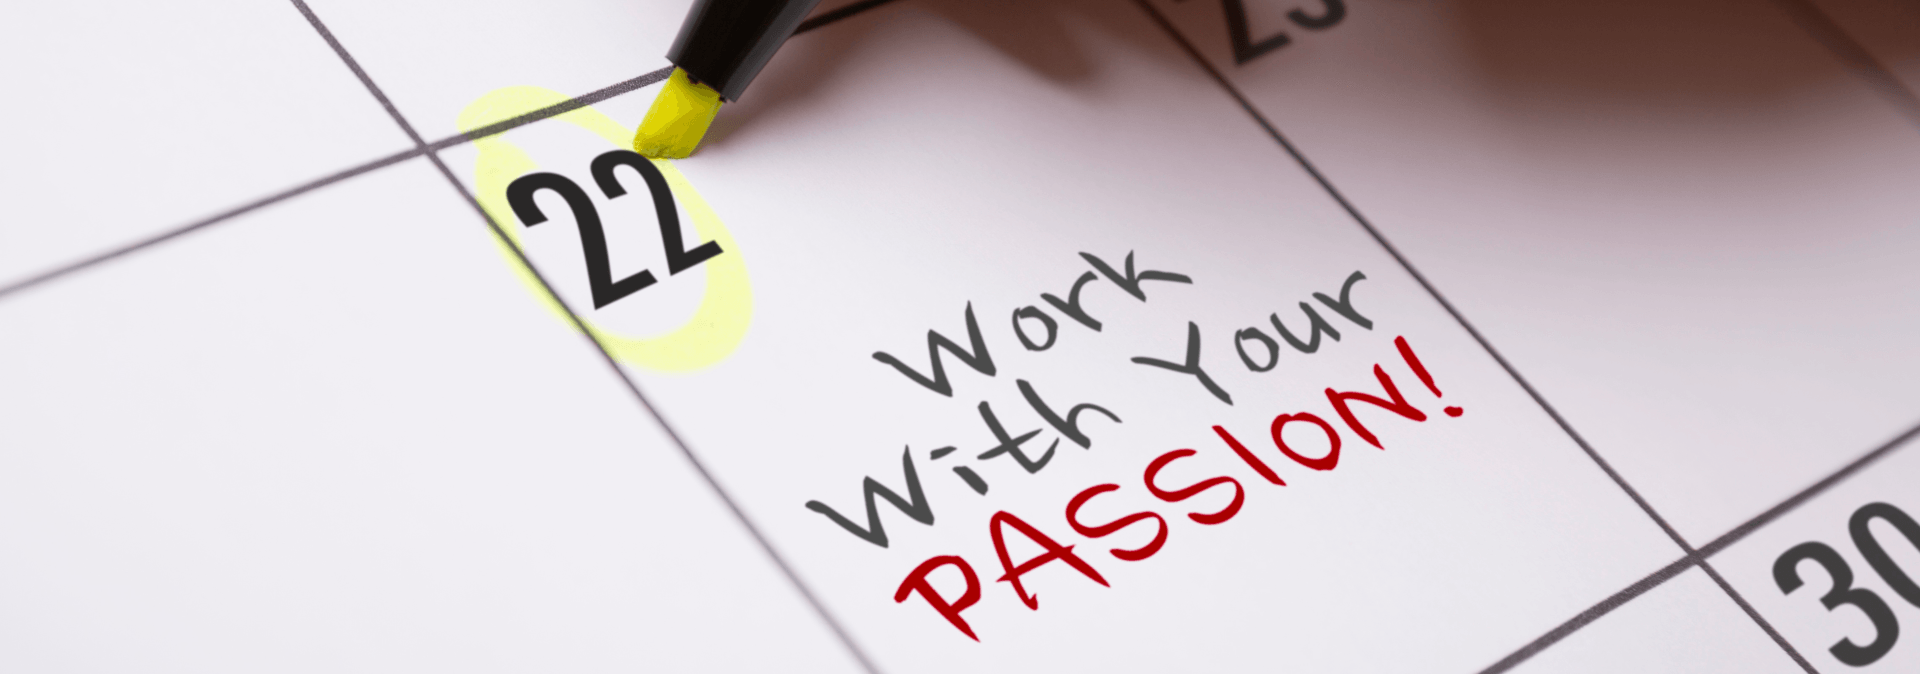 Work with your passion written on calendar